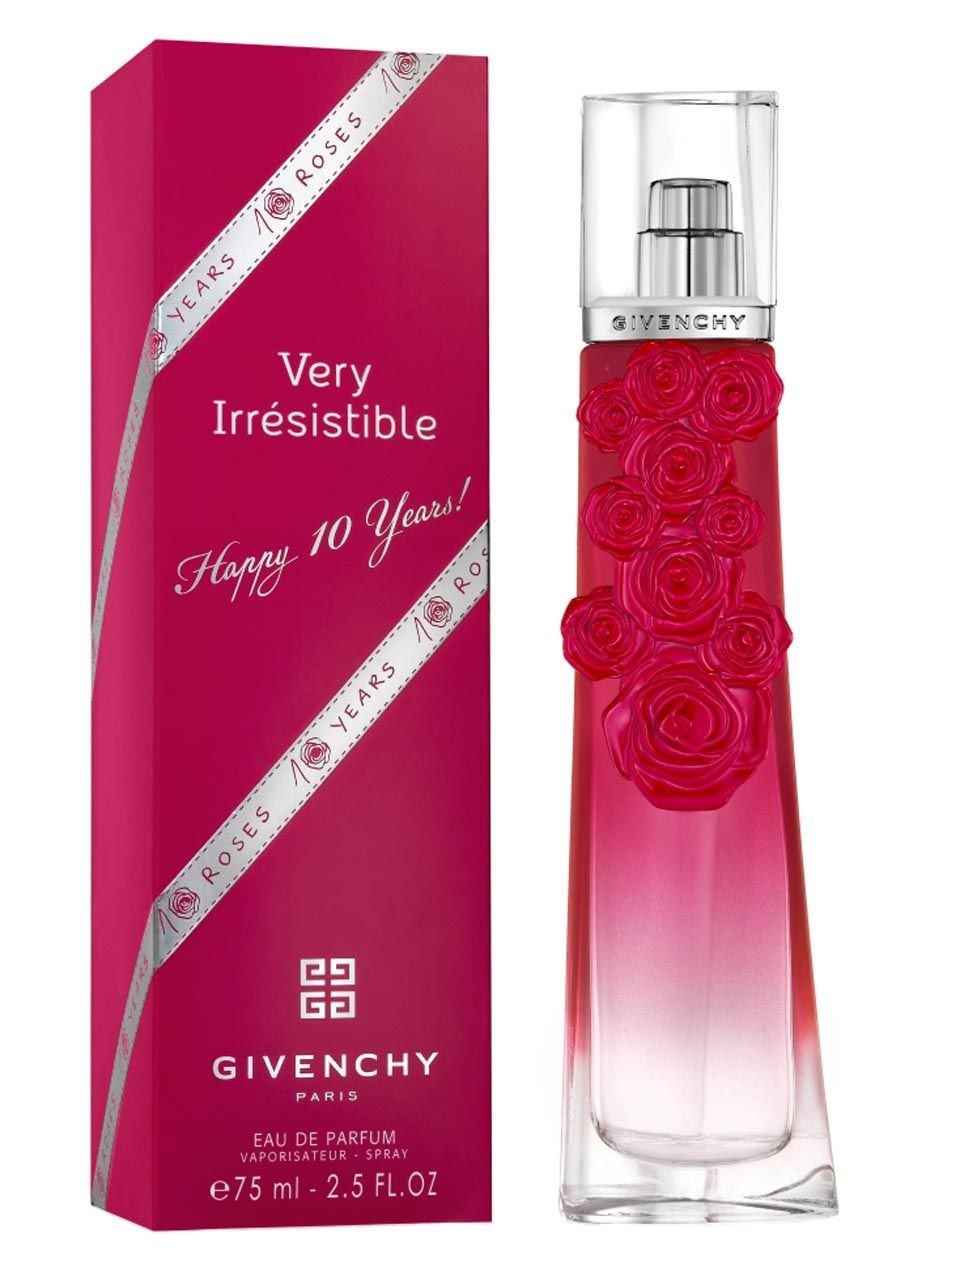 Изображение парфюма Givenchy Very Irresistible Roses 10 Years